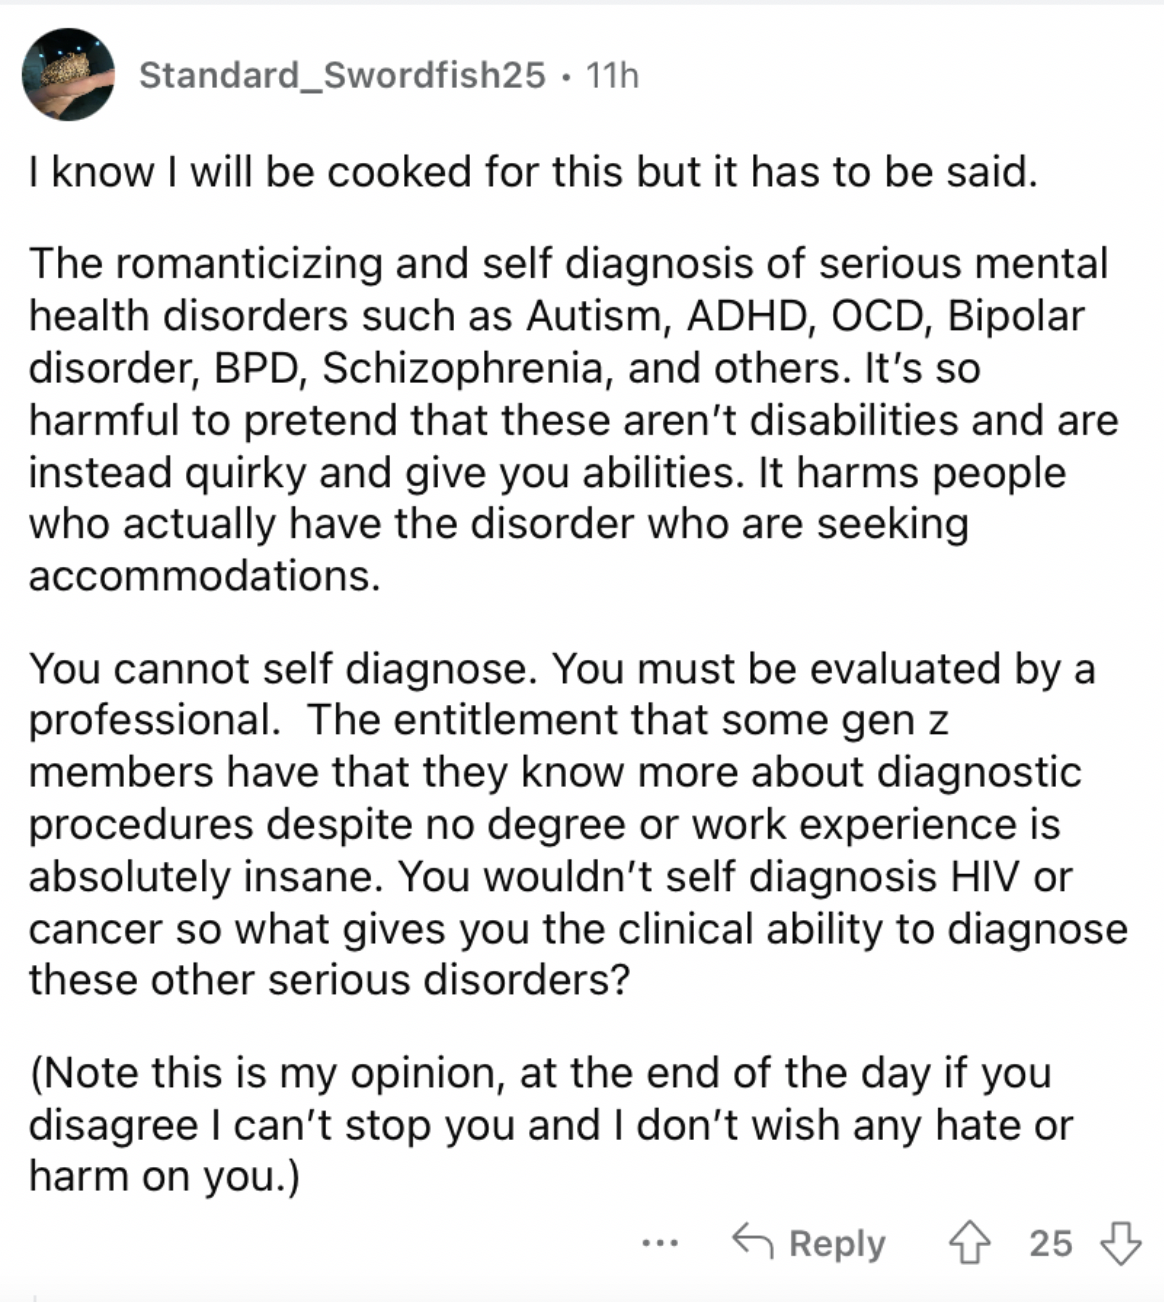 Reddit screenshot about how people shouldn't diagnose themselves.